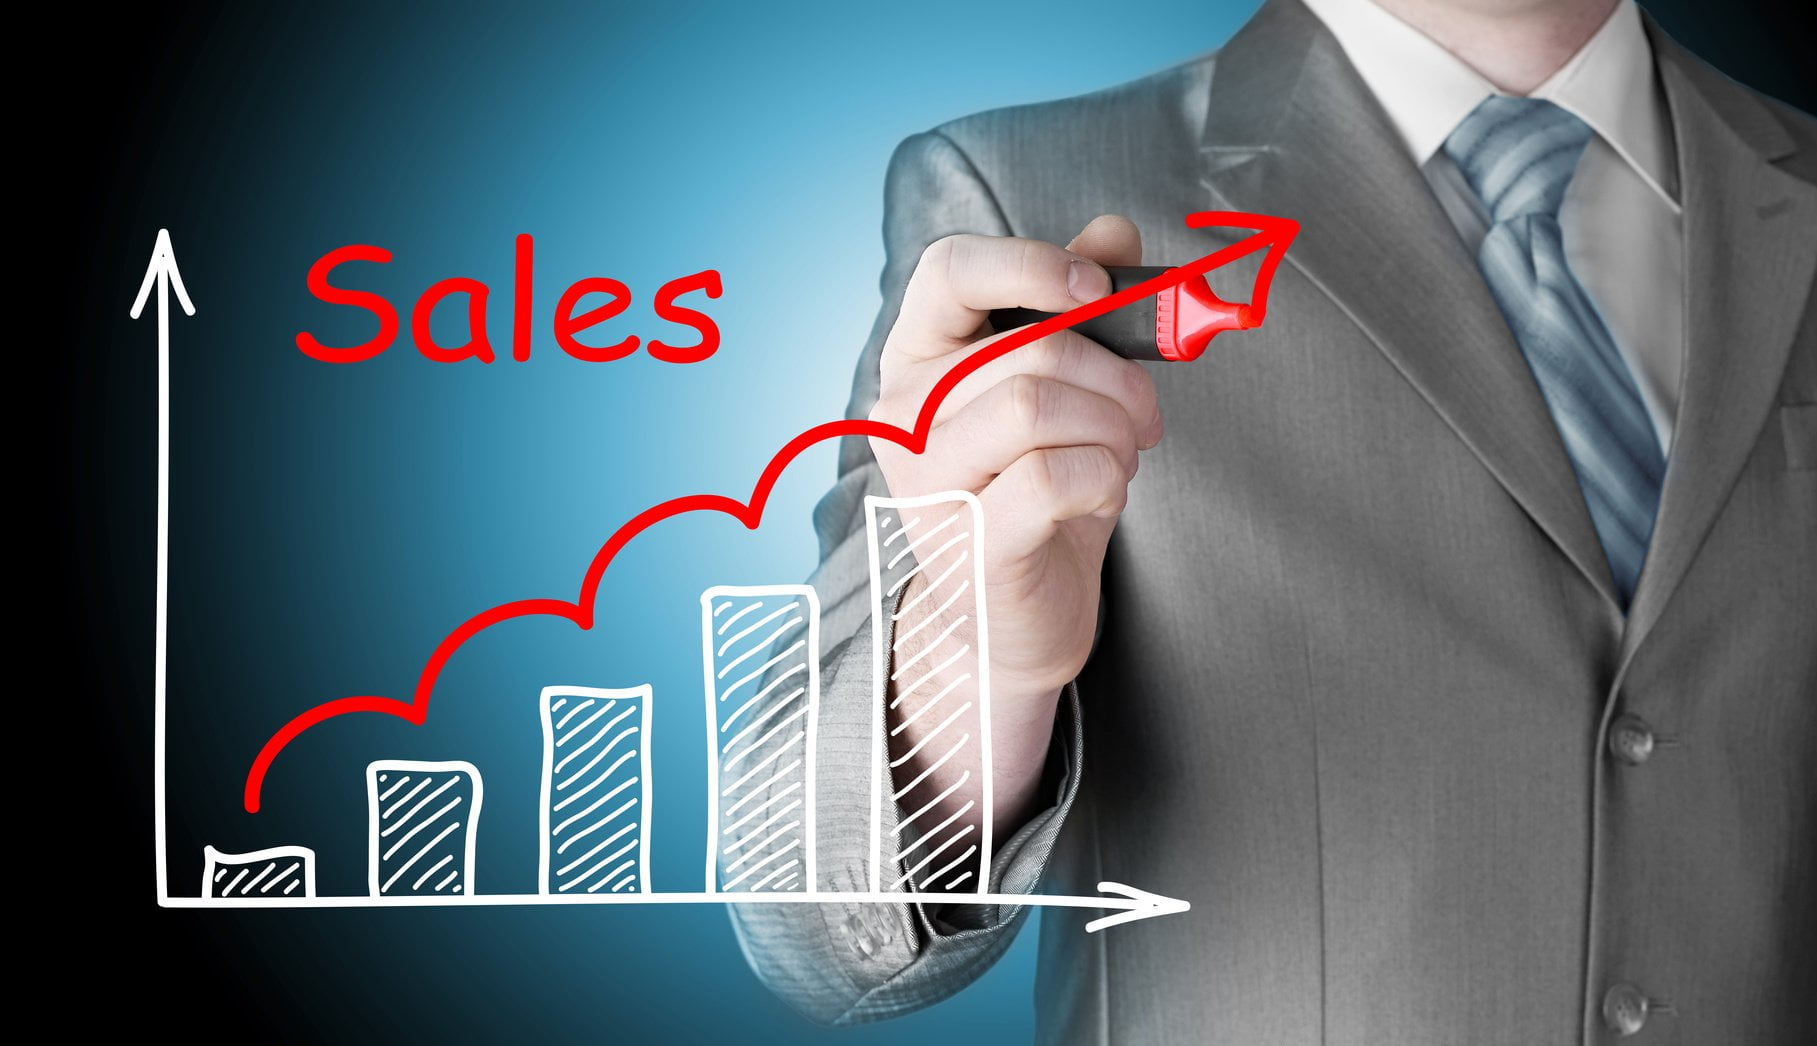 Improve Your Sales This Year by Following 3 Guidelines